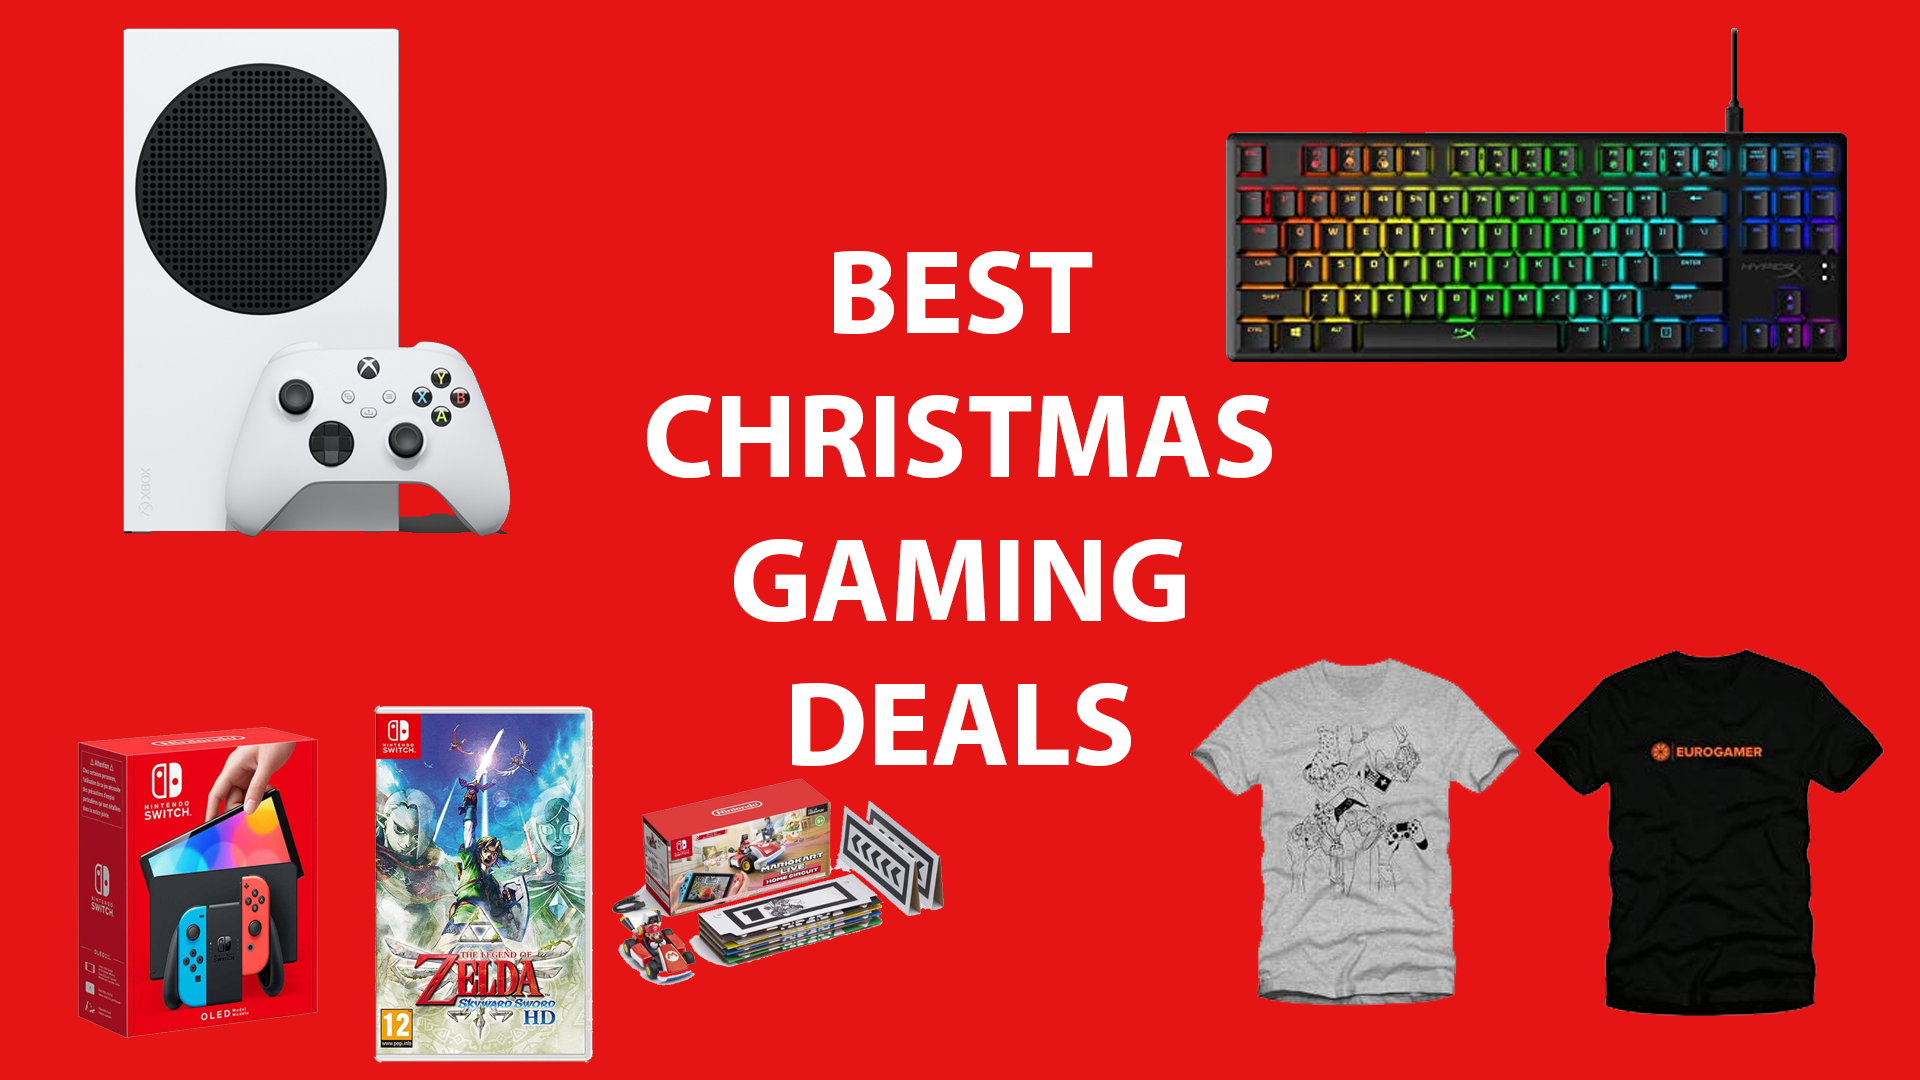 Image for LIVE: These are the best Christmas gaming deals